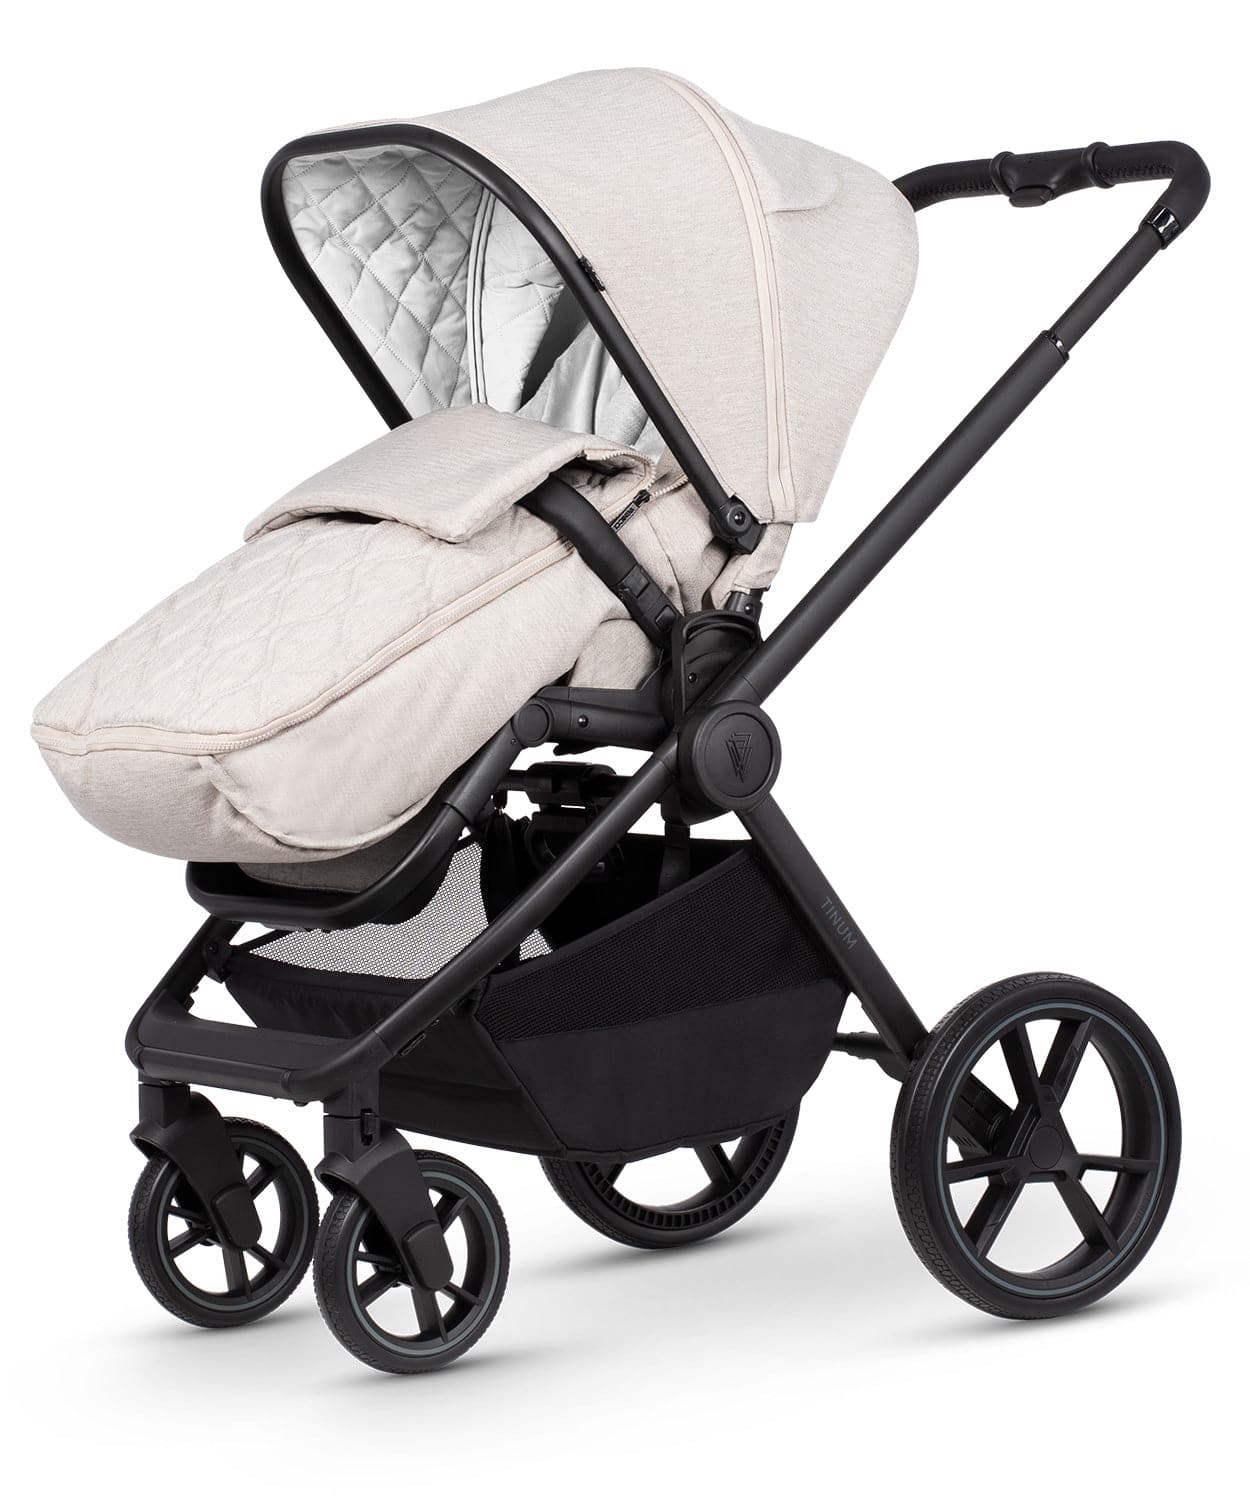 Venicci Tinum Edge 3 In 1 + Base Bundle Travel System - Dust - For Your Little One